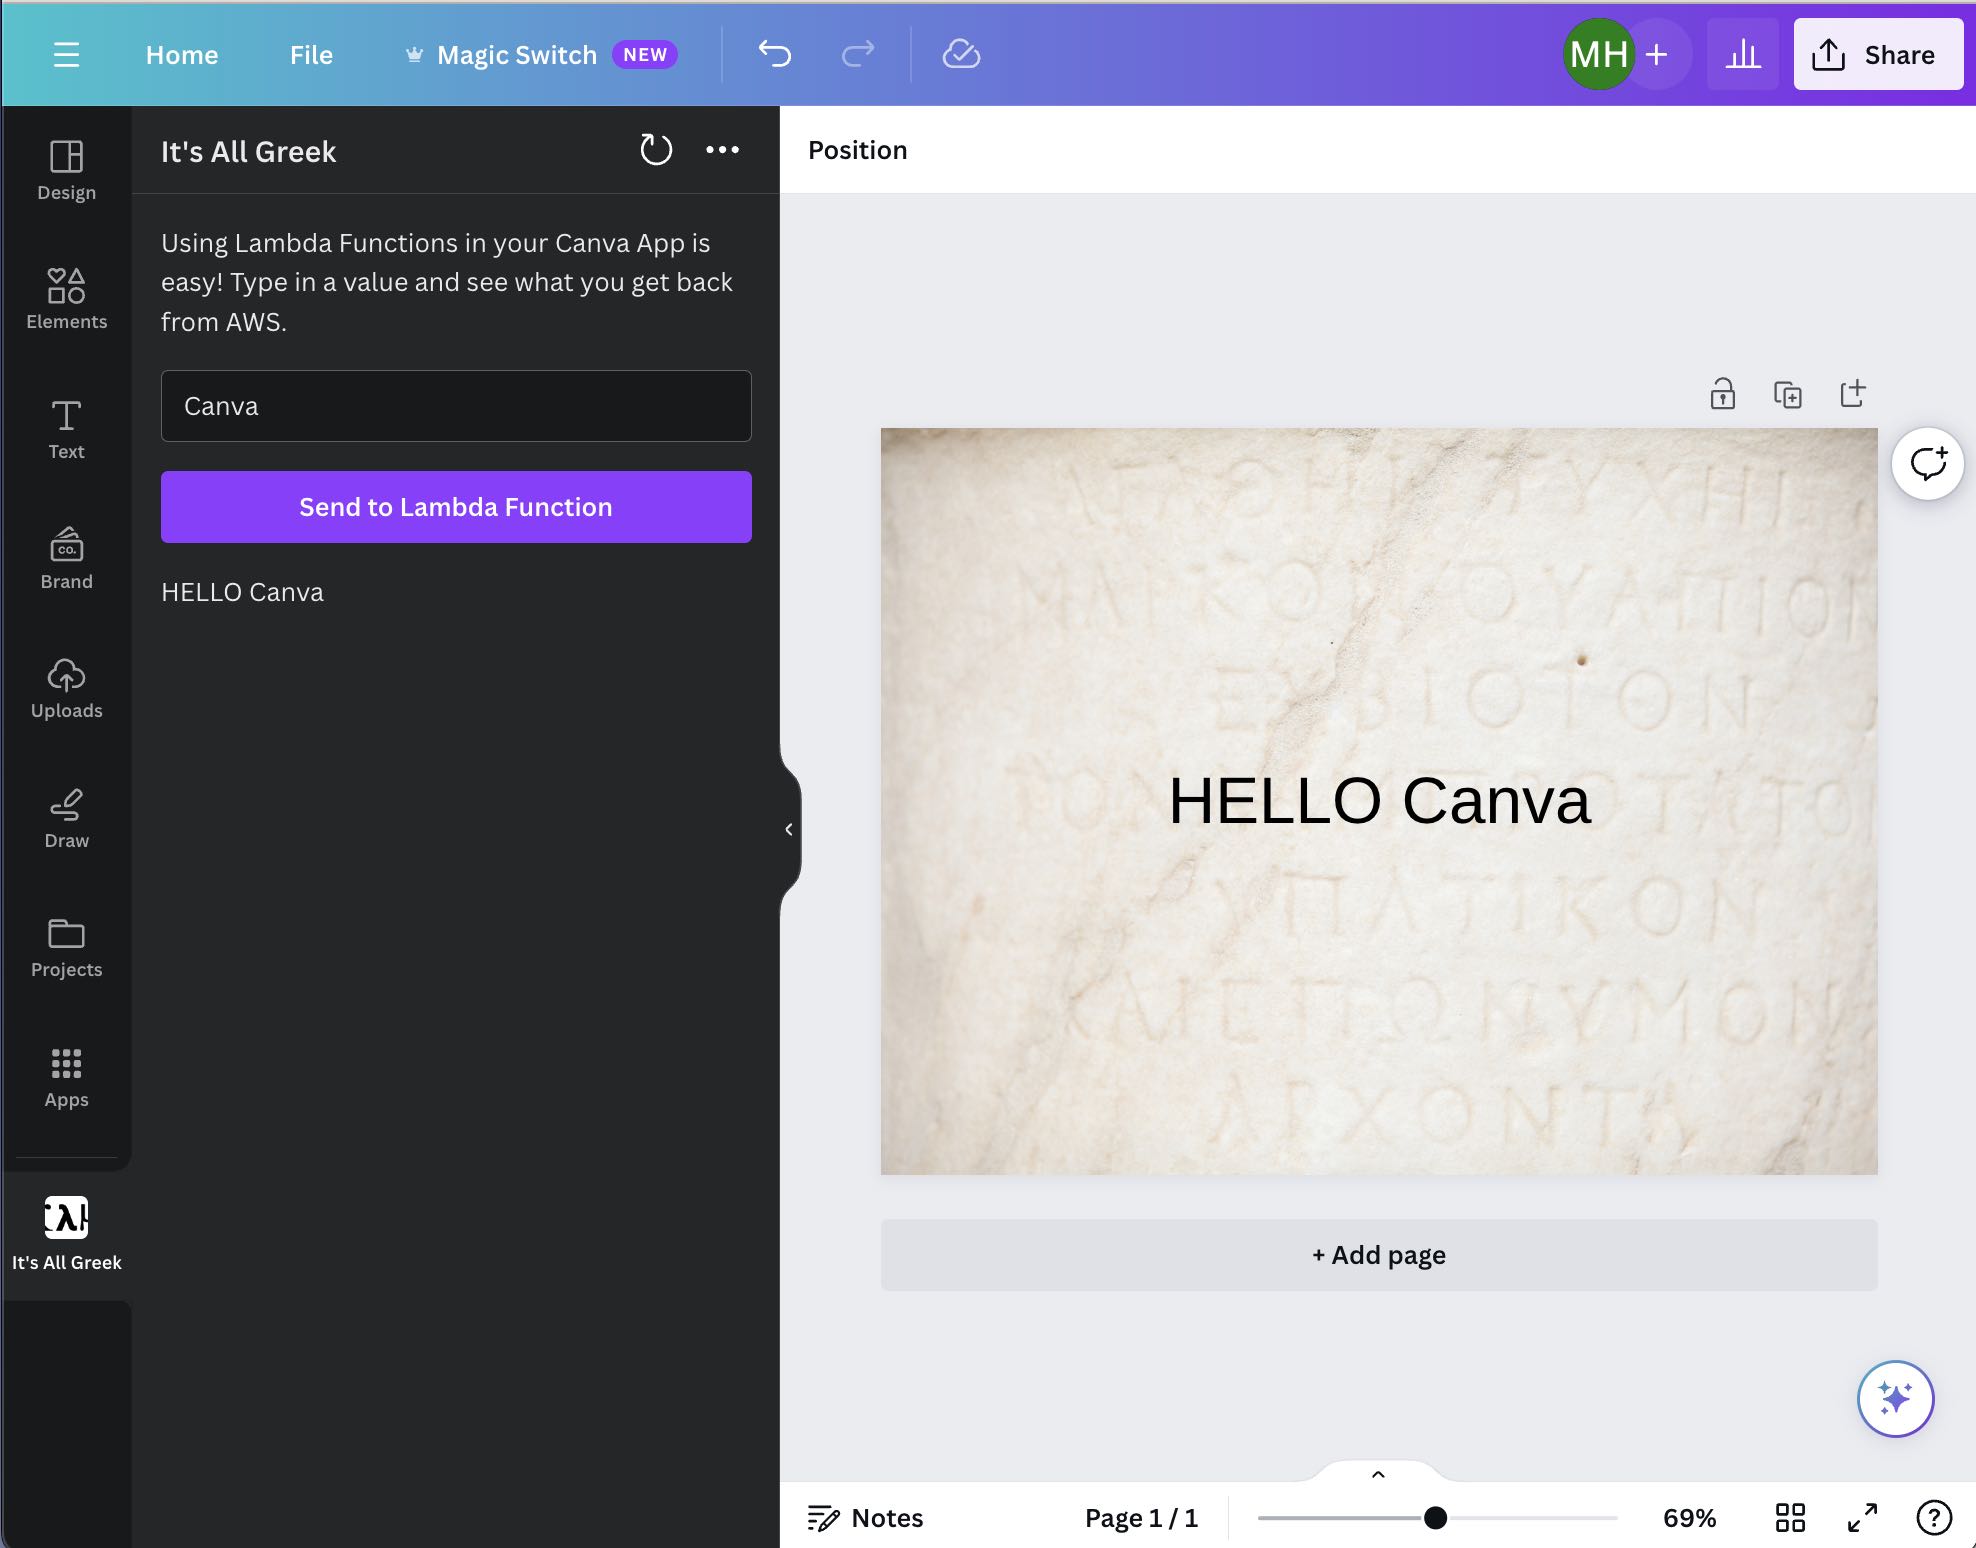 An app on Canva that we'll use as an example